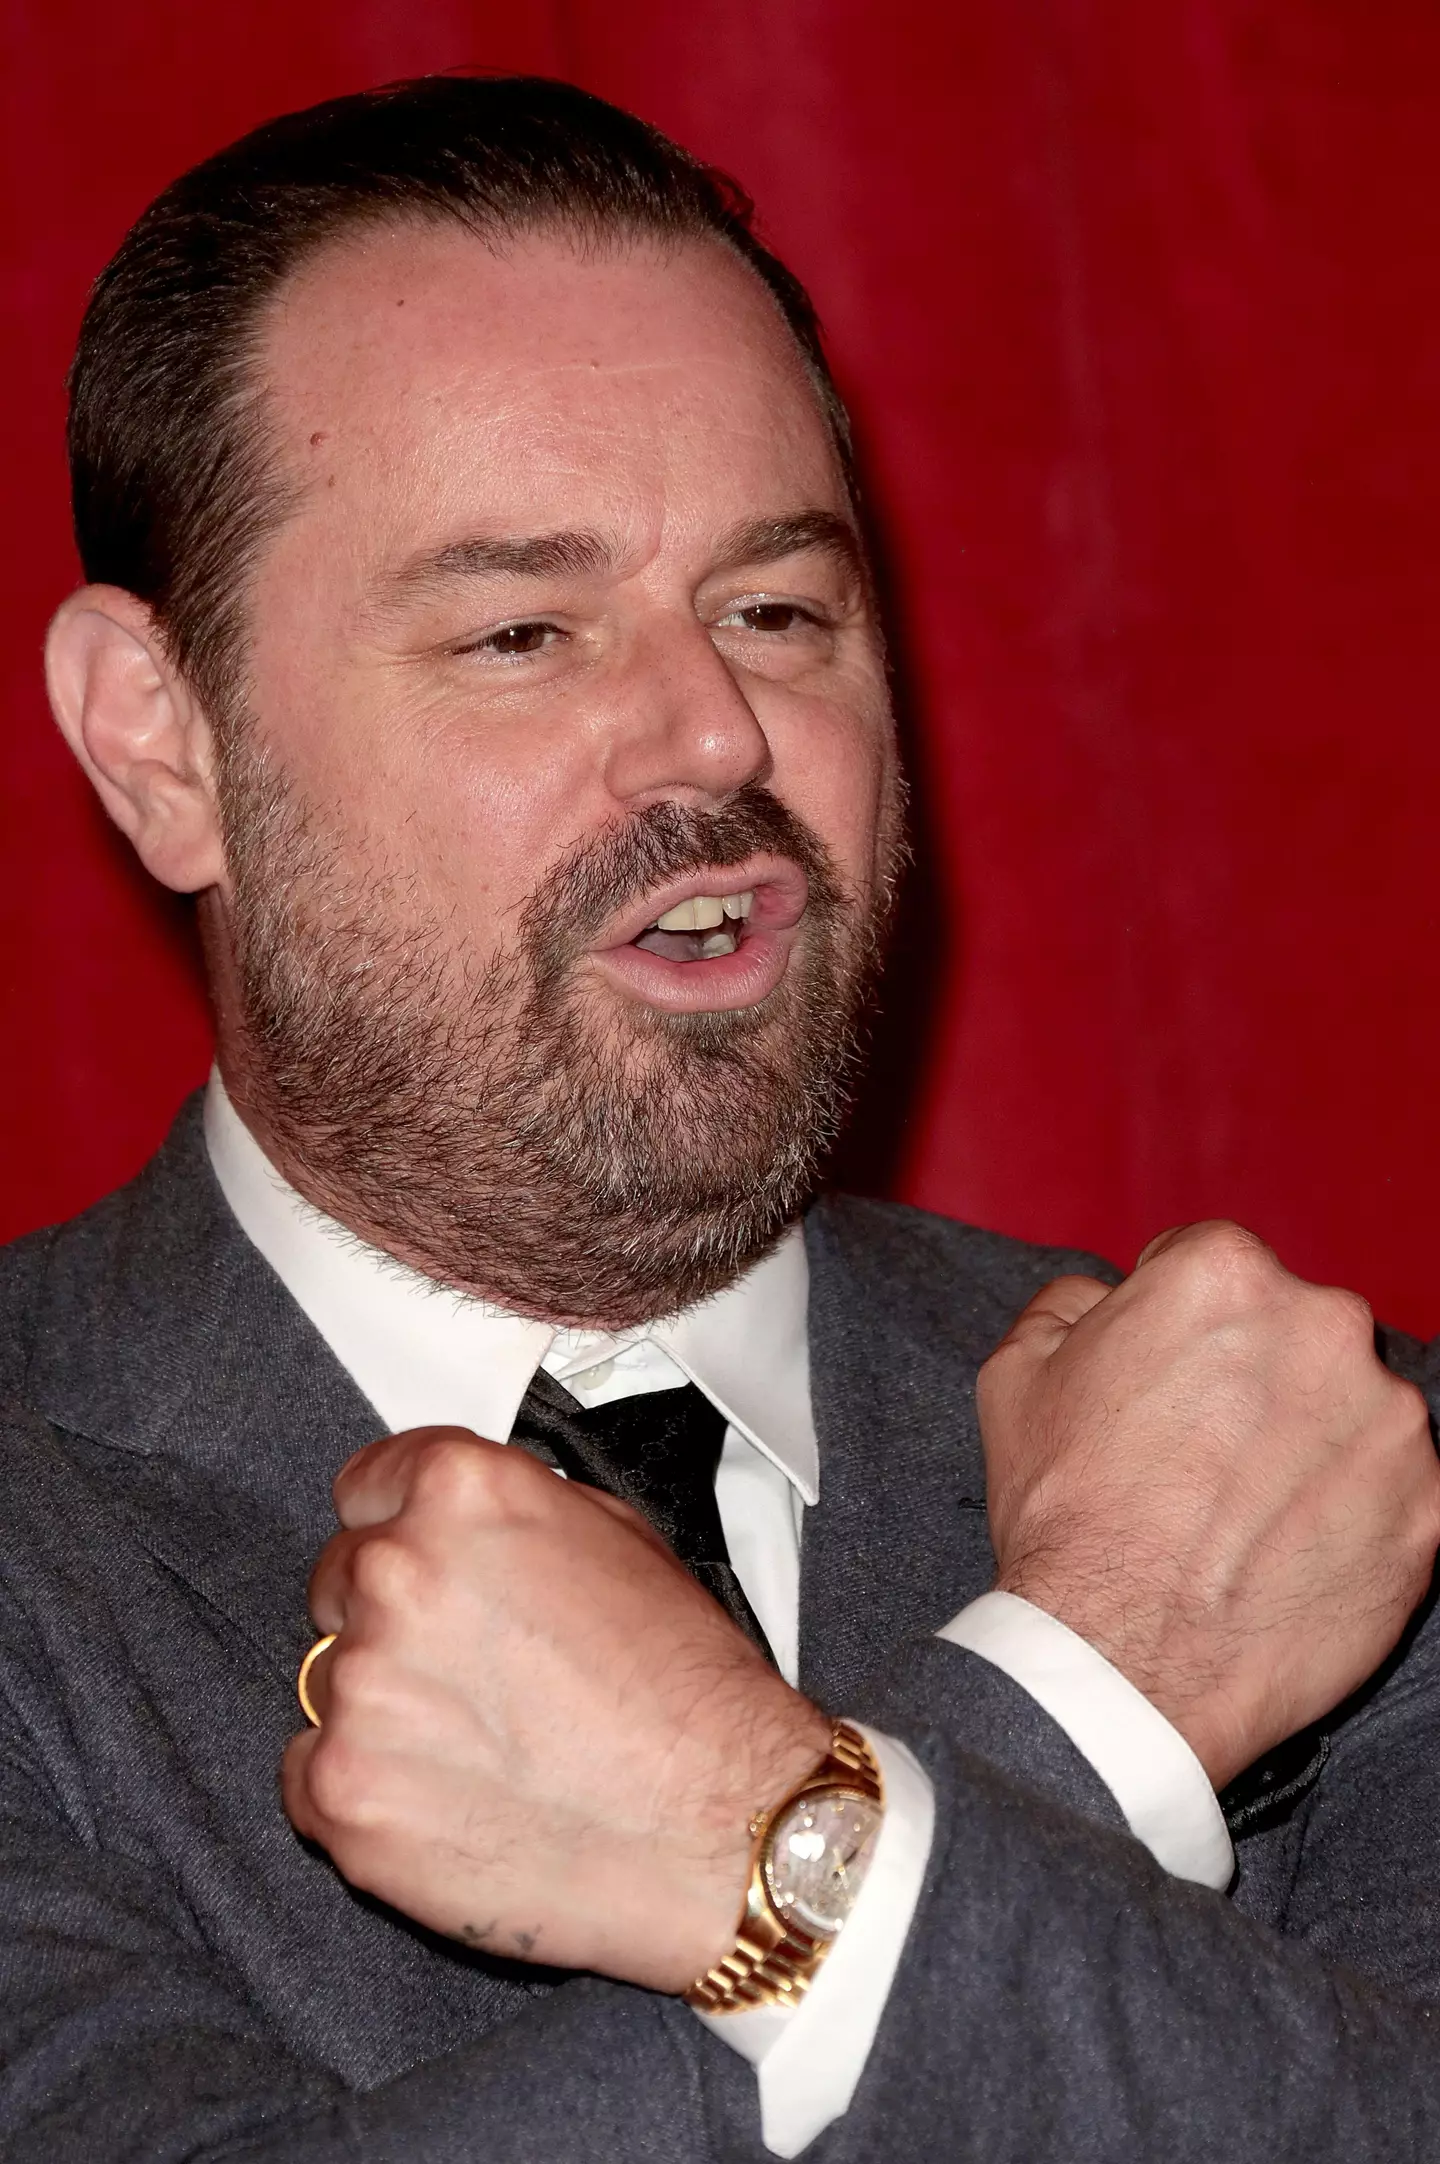 Danny Dyer said he was going to get James Buckley a job on EastEnders.